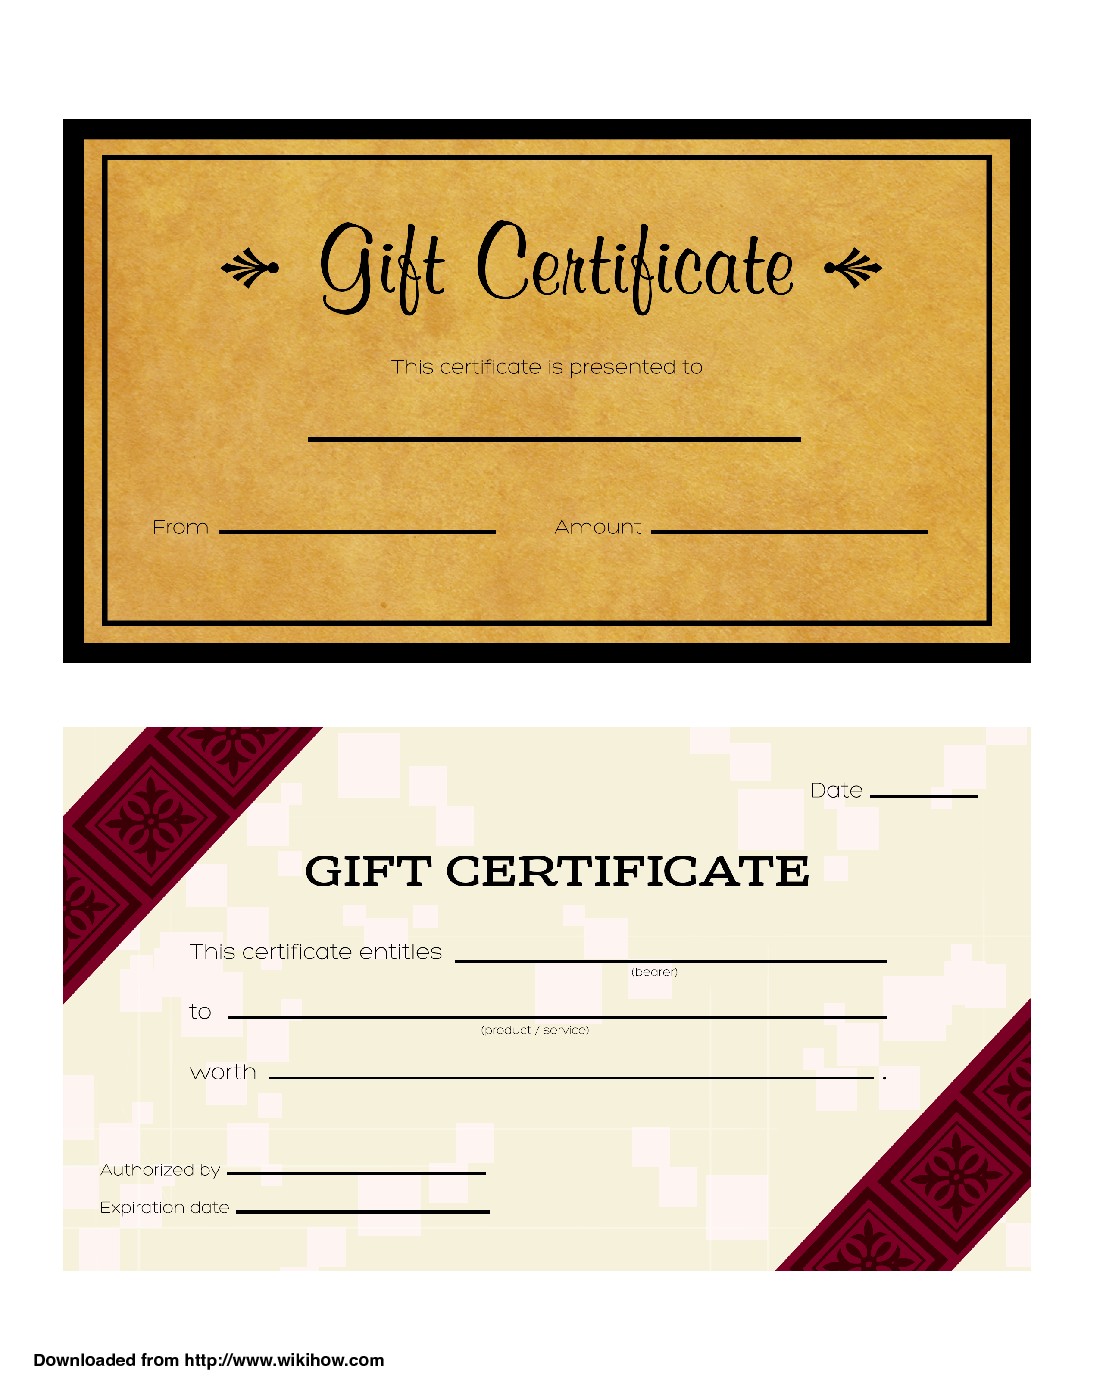 3 Ways To Make Your Own Printable Certificate WikiHow How Create A In Word